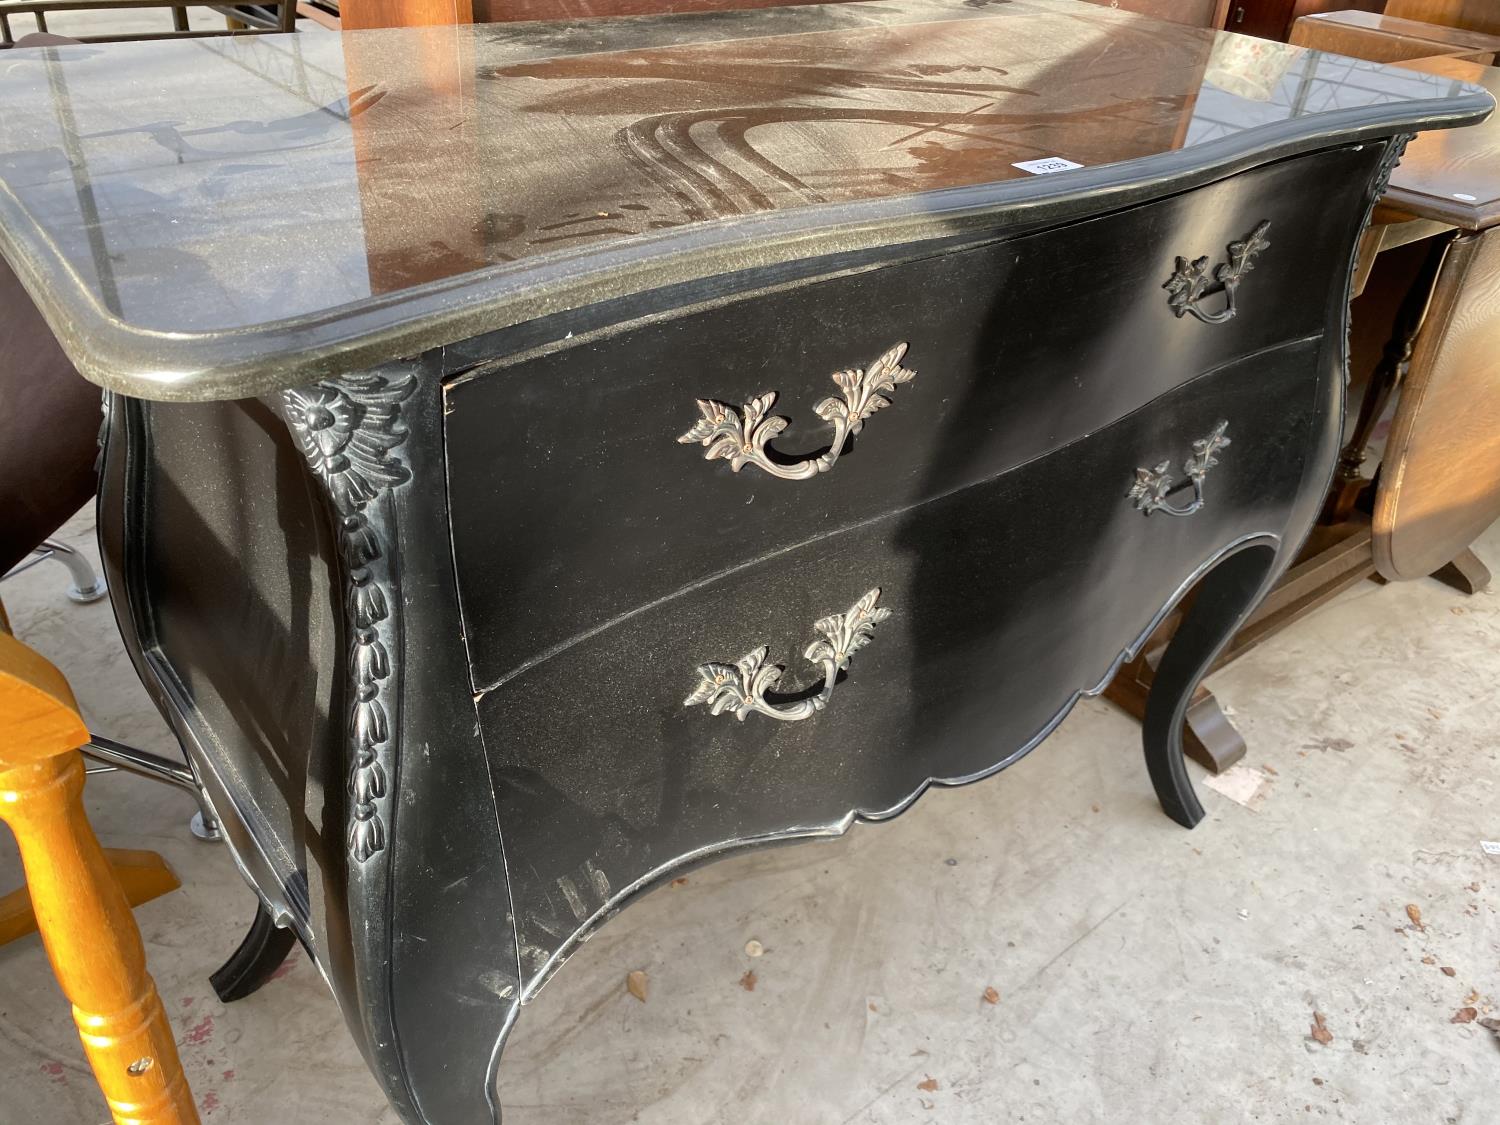 AN ORNATE BLACK CHEST OF DRAWERS WITH TWO LONG DRAWERS - Image 2 of 2